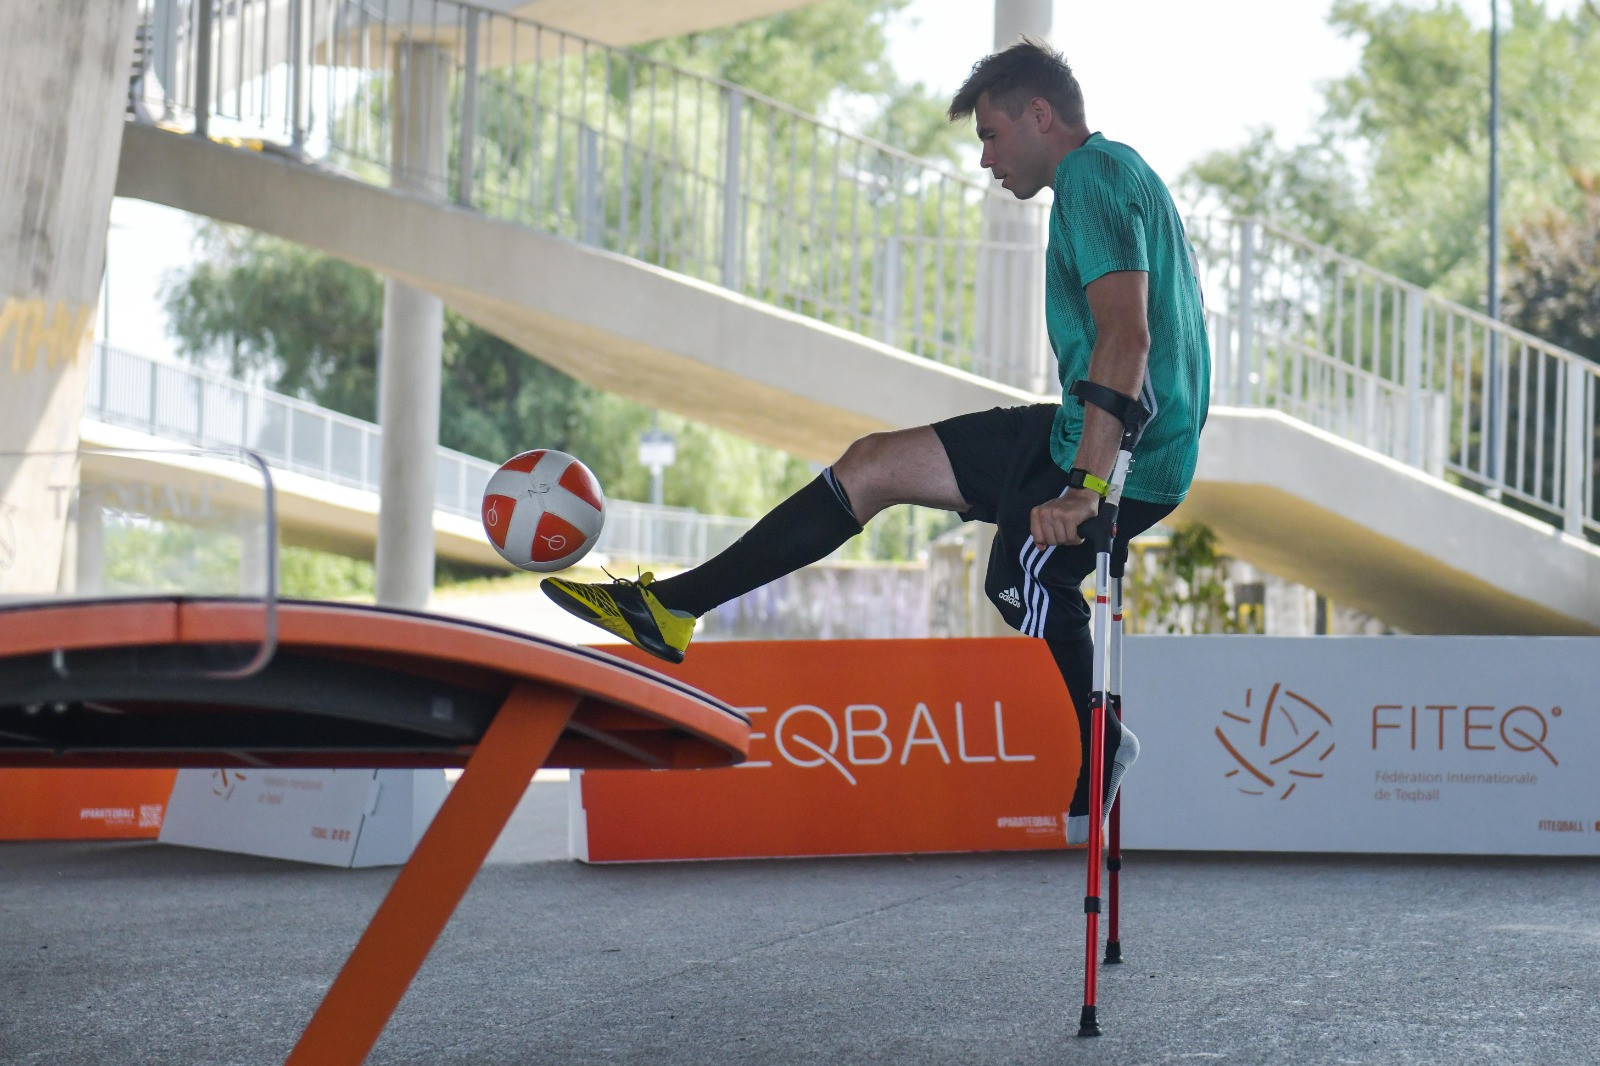 There are two sport classes for Para teqball - one for athletes permanently requiring the use of crutches, and a second which is for athletes with a prosthesis ©FITEQ